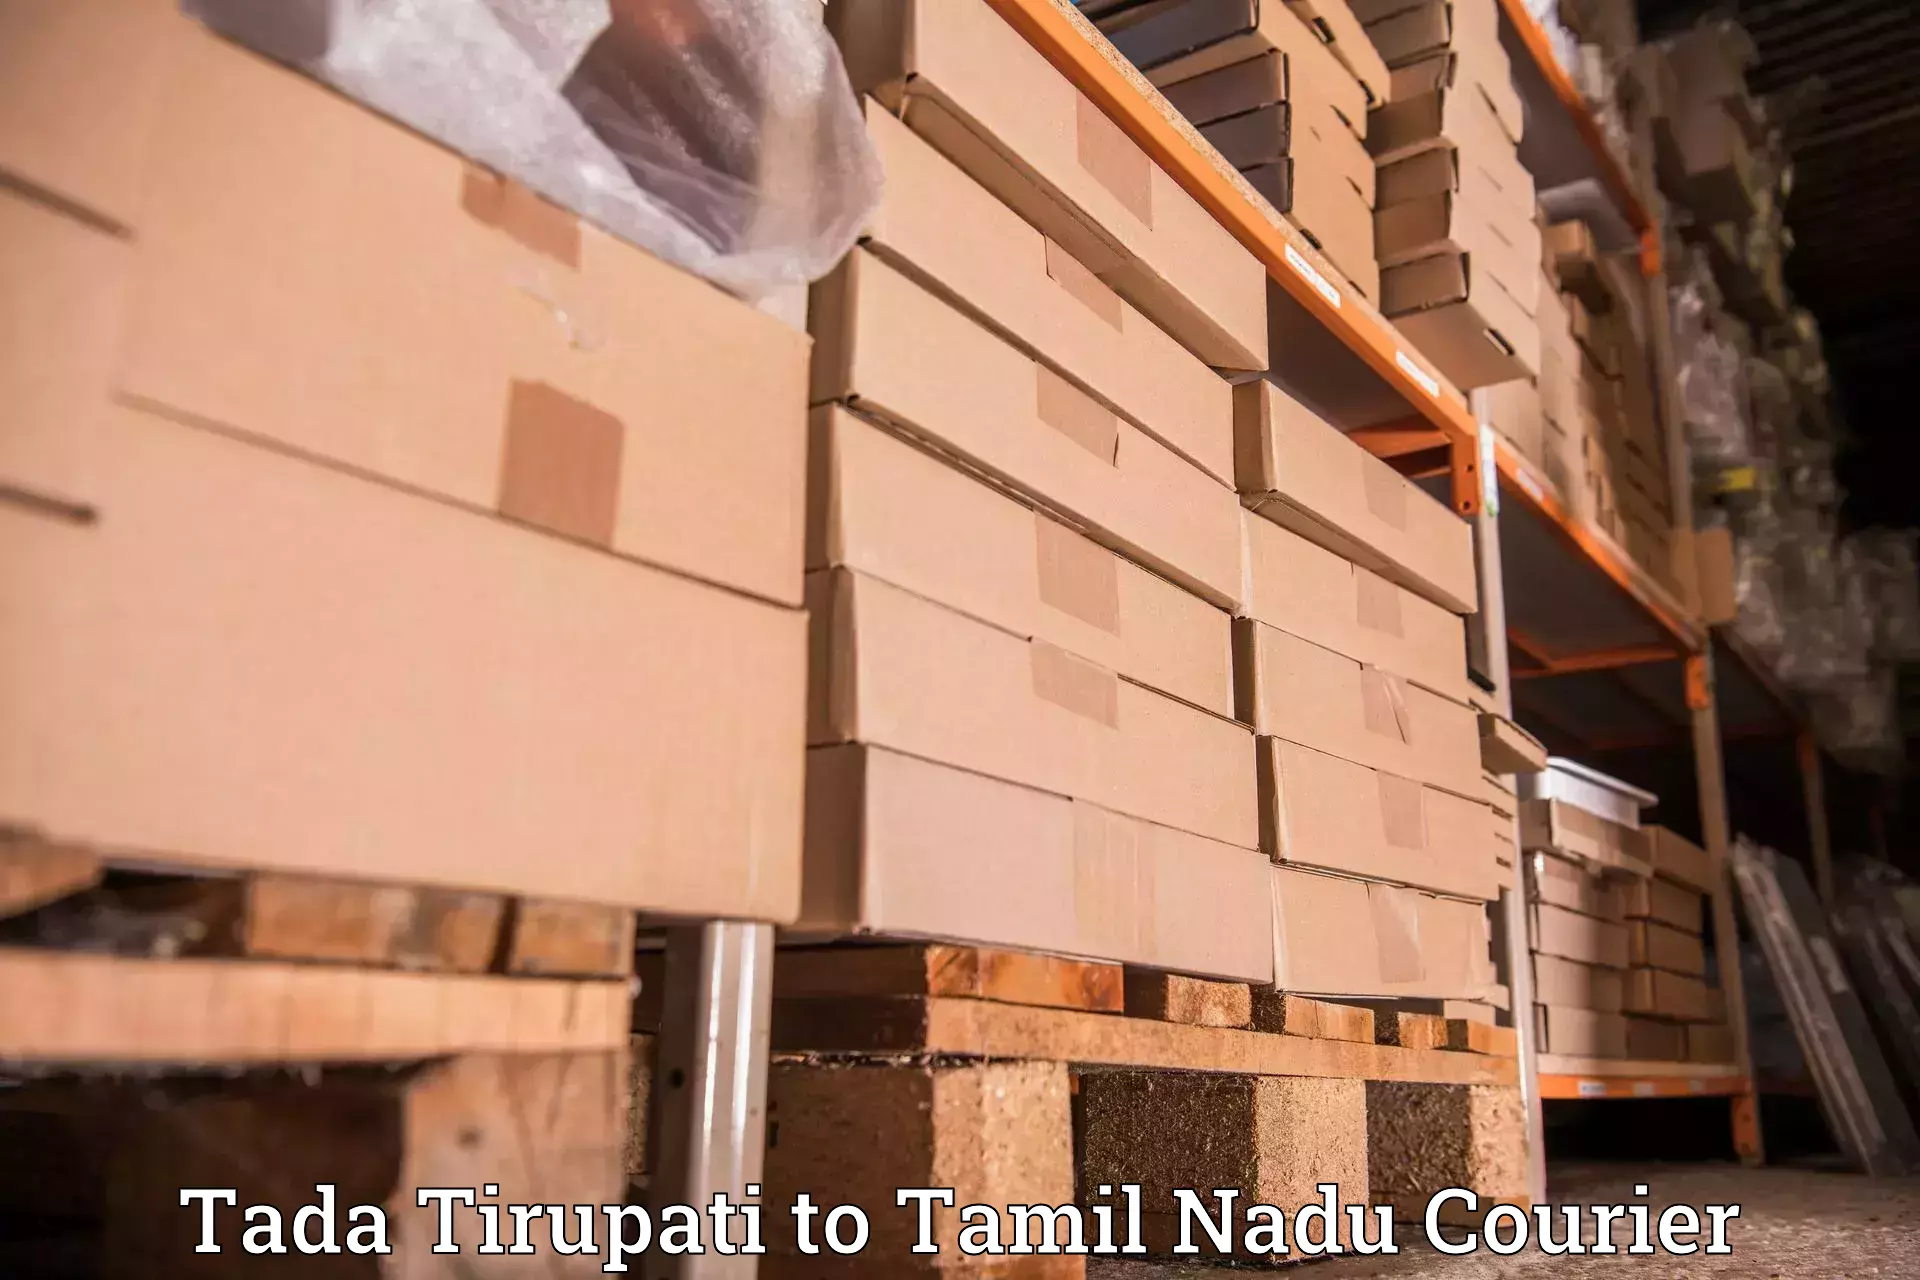 High-priority parcel service Tada Tirupati to Meenakshi Academy of Higher Education and Research Chennai